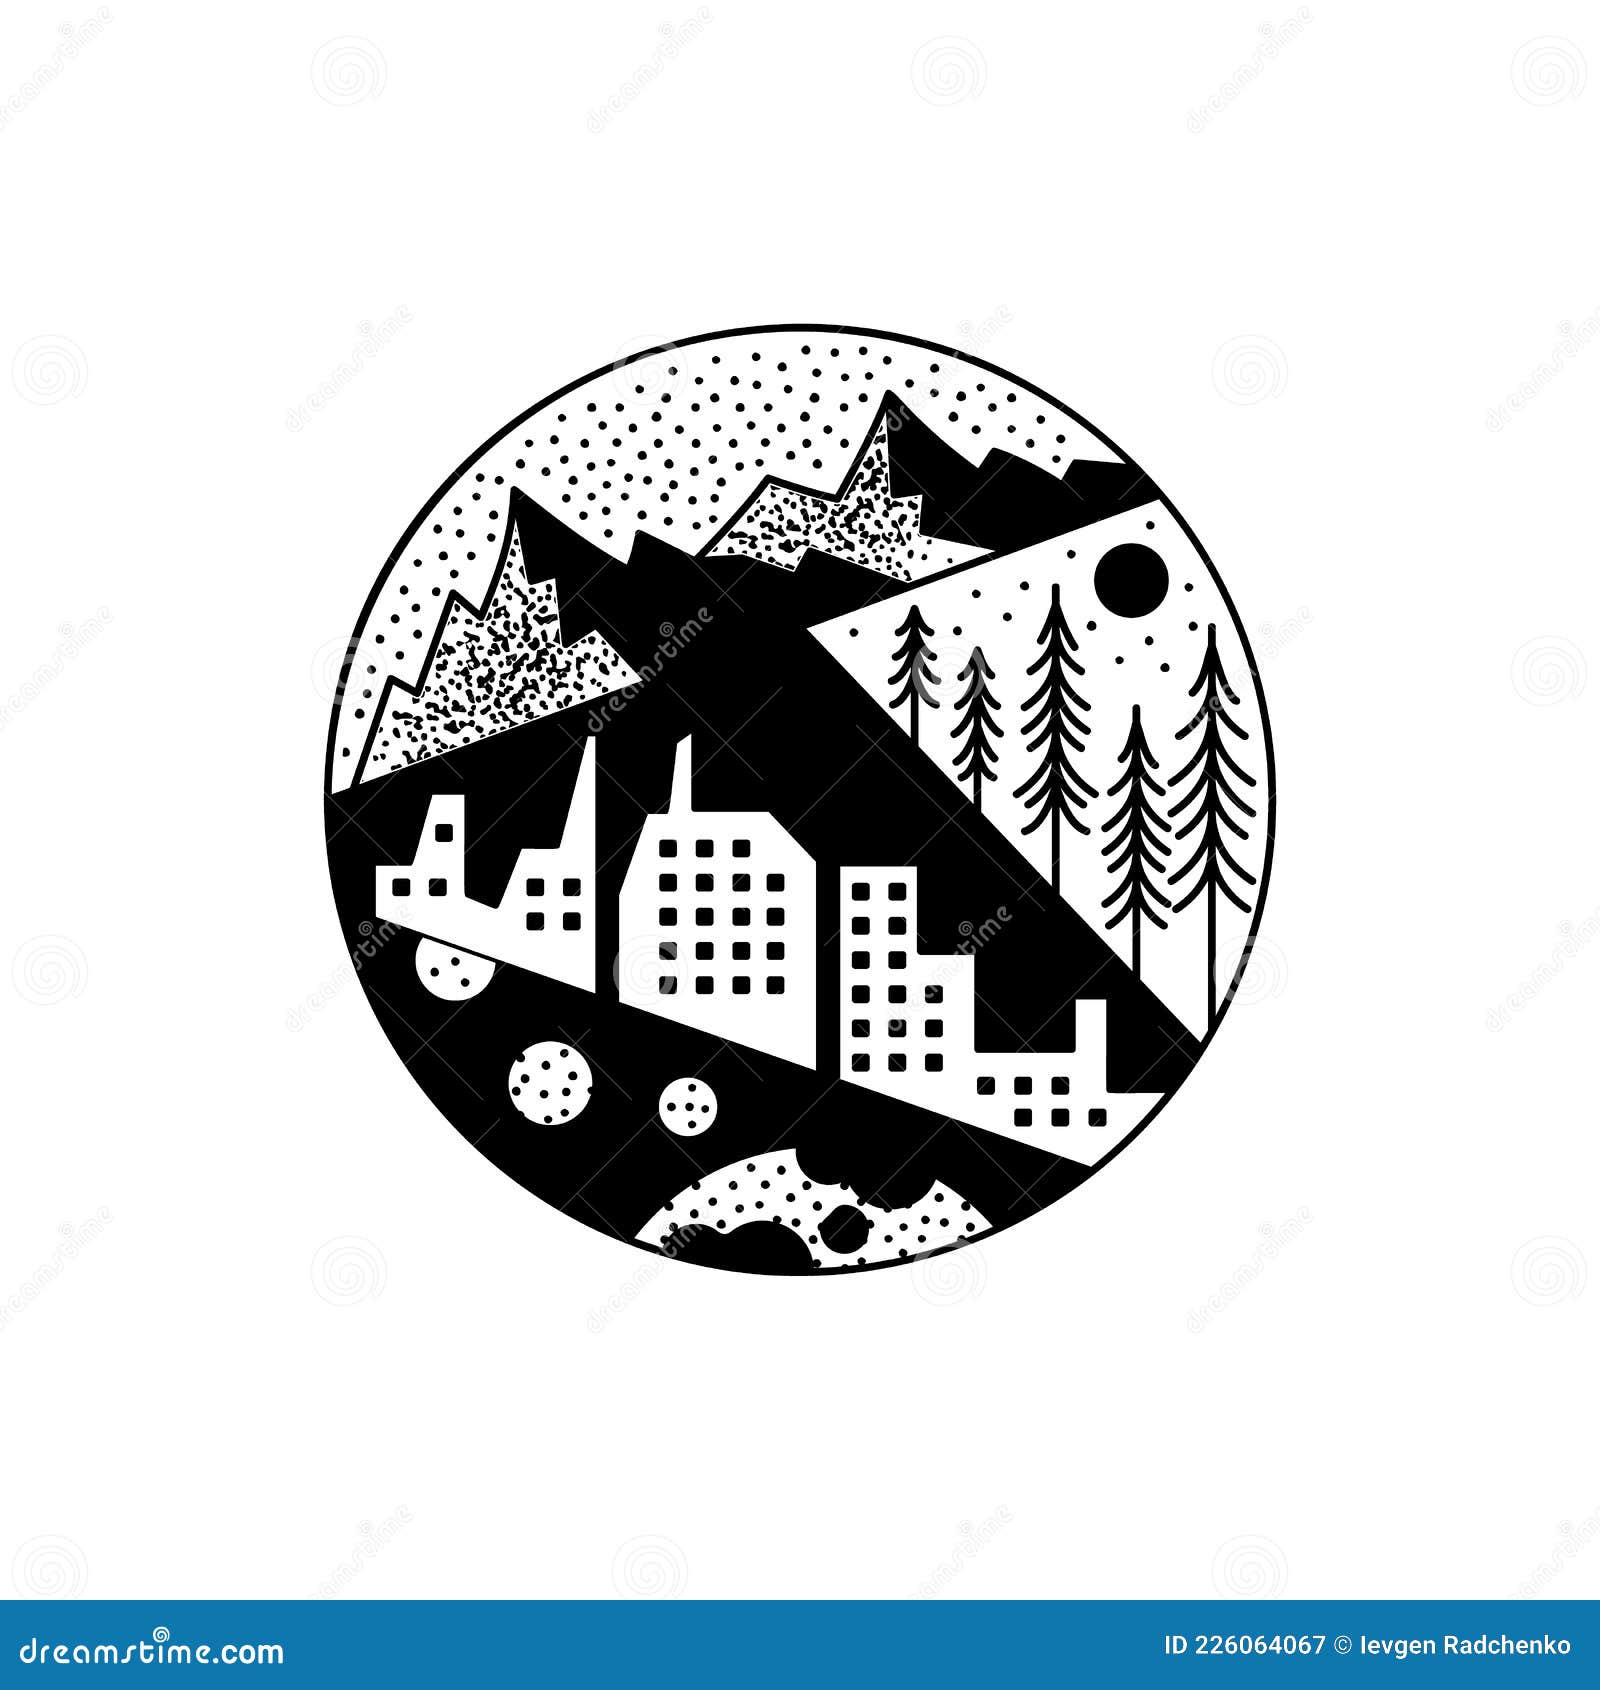 Mountains Adventure Tattoo Design. Summer Crest Logo with Mountain and  Urban City Scene Stock Illustration - Illustration of logotype, tattoo:  226064067